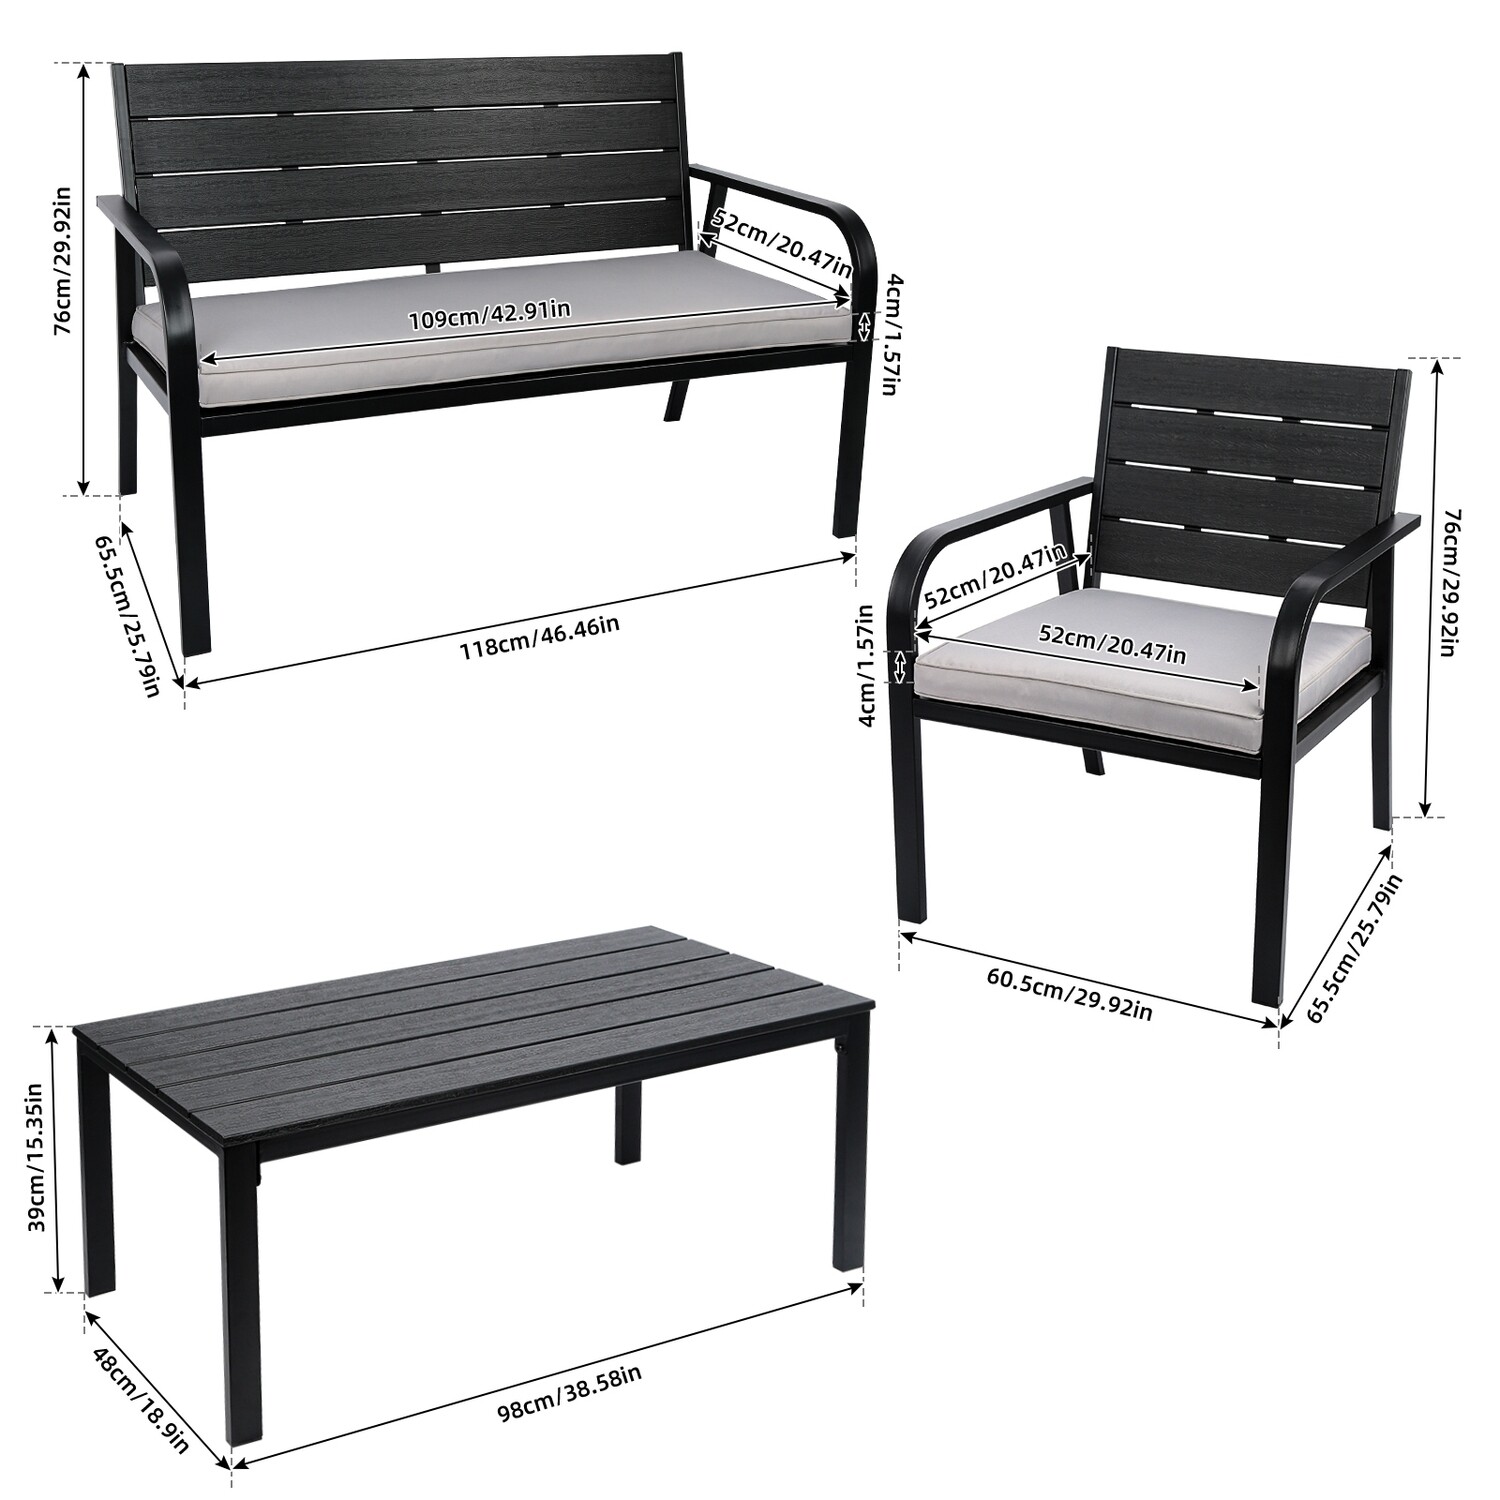 4 Pieces Patio Garden Sofa Conversation Set Wood Grain Design PE Steel Frame Loveseat All Weather Outdoor Furniture Set with Cushions Coffee Table for Backyard Balcony Lawn White or Black, Options: Black+ Gray+Steel